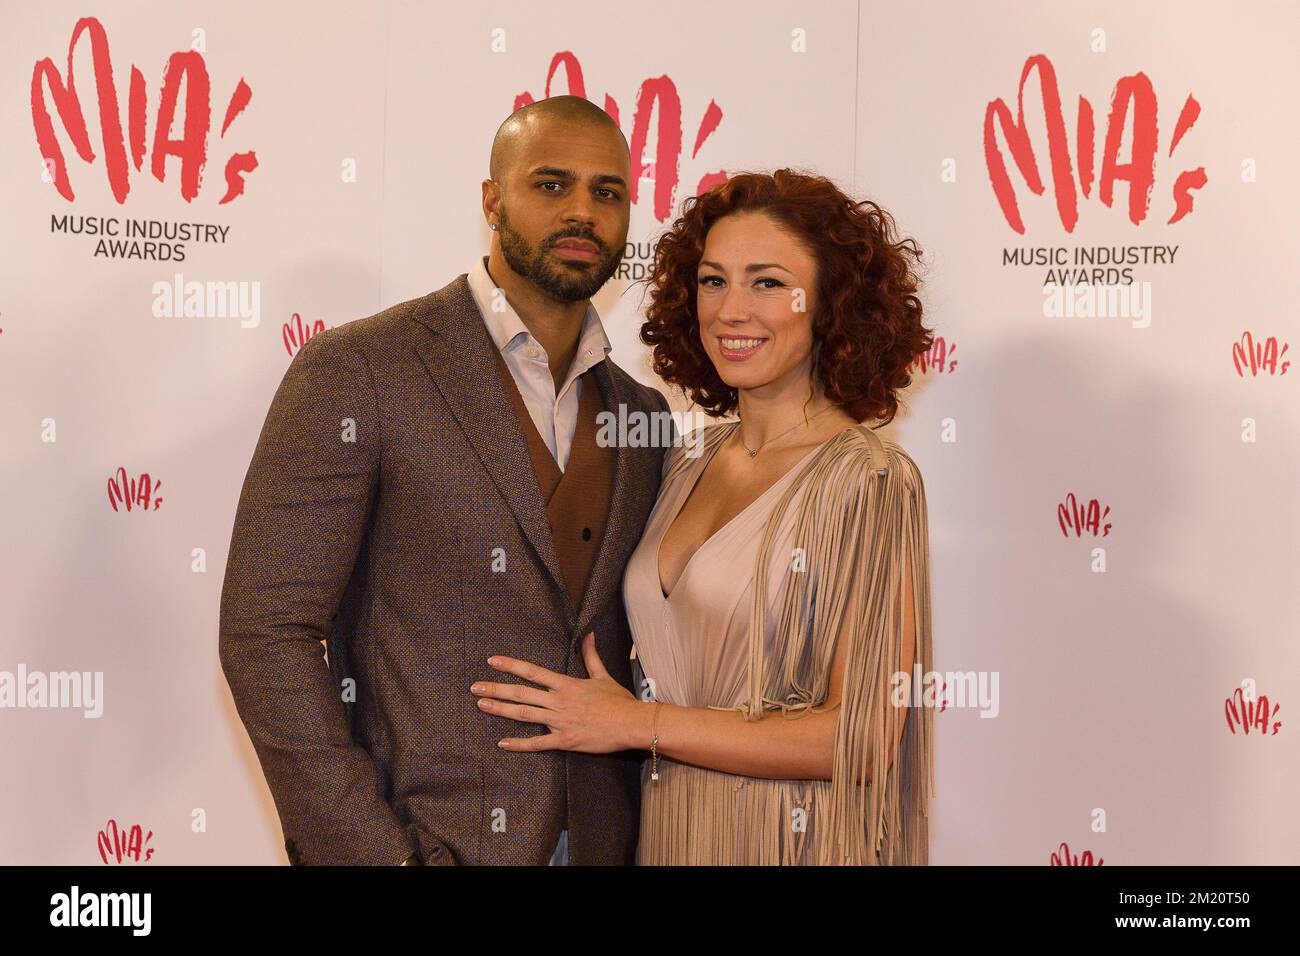 20160121 - LINT, BELGIUM: Natalia Druyts and partner Alexander pictured  during the ninth edition of the MIA's (Music Industry Award) award show, in  Lint, Thursday 21 January 2016. The MIA awards are